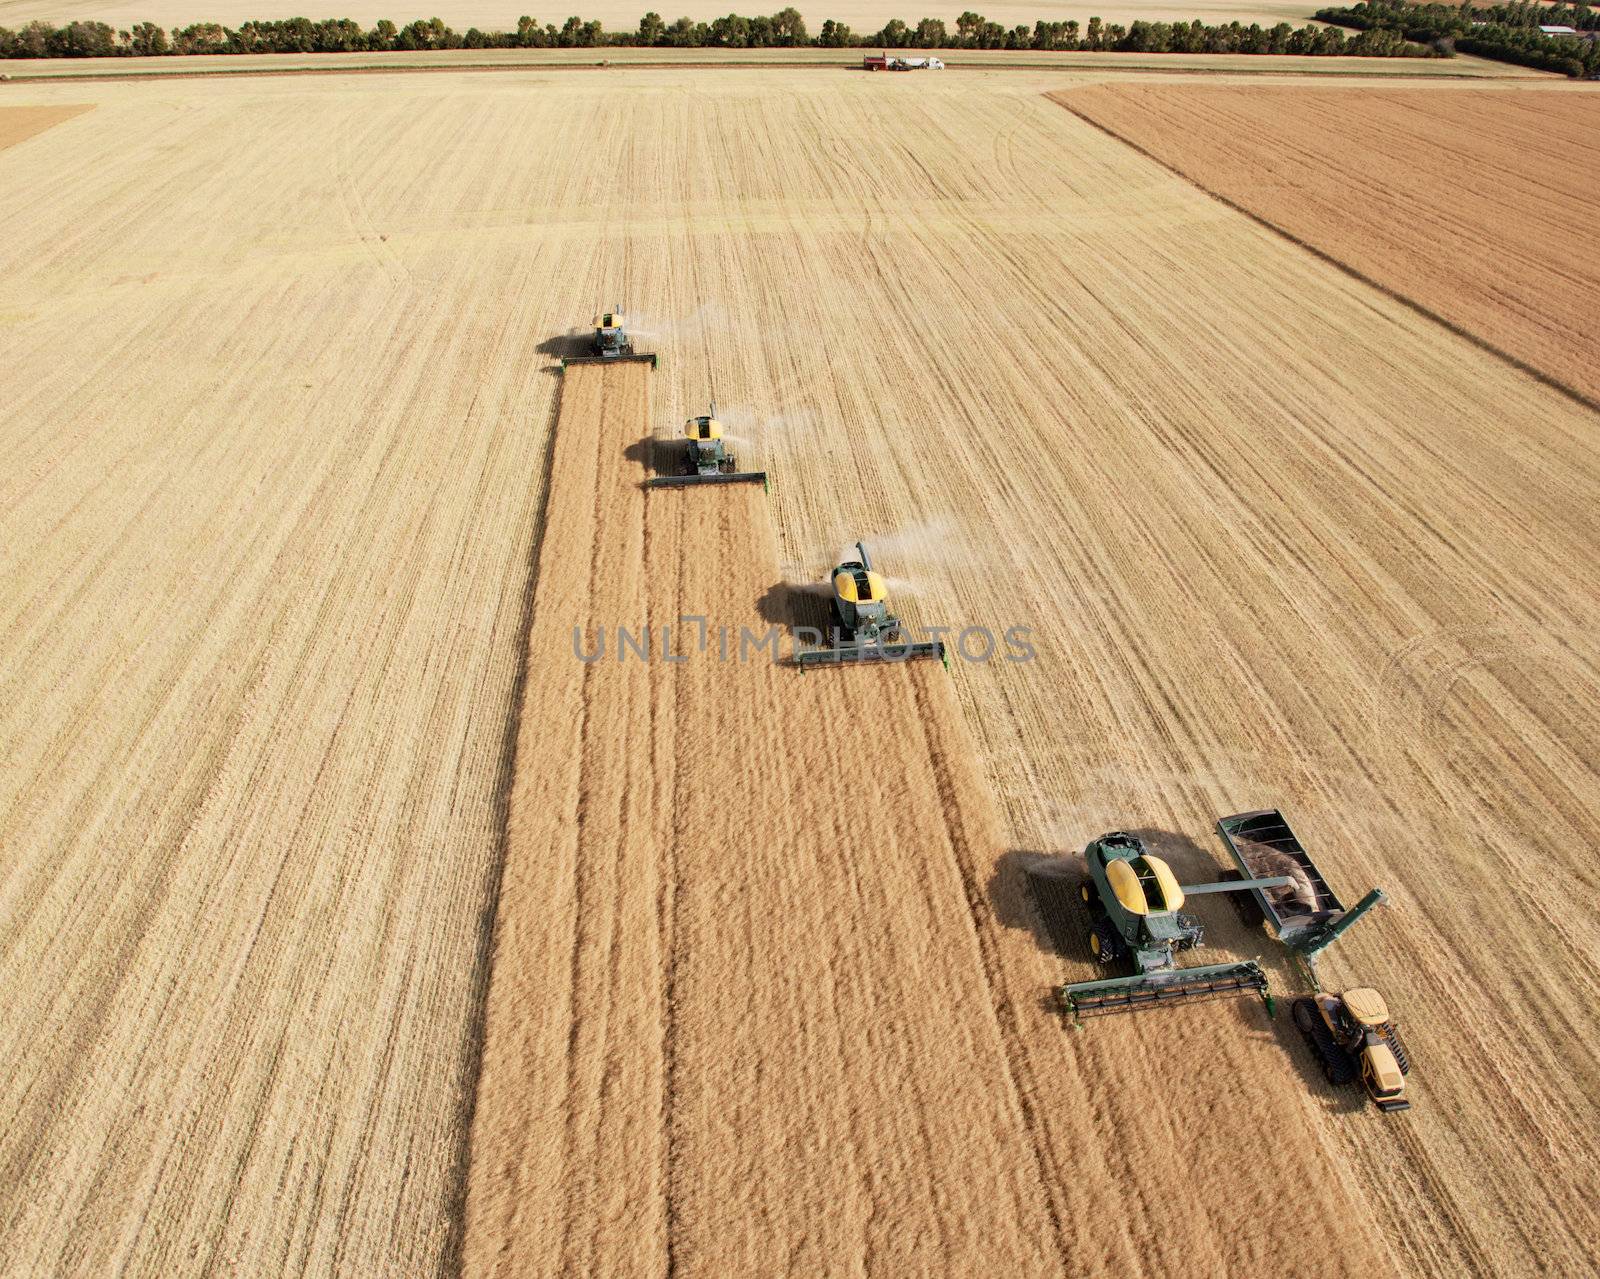 Four harvesters combing on a prairie landscape in formation